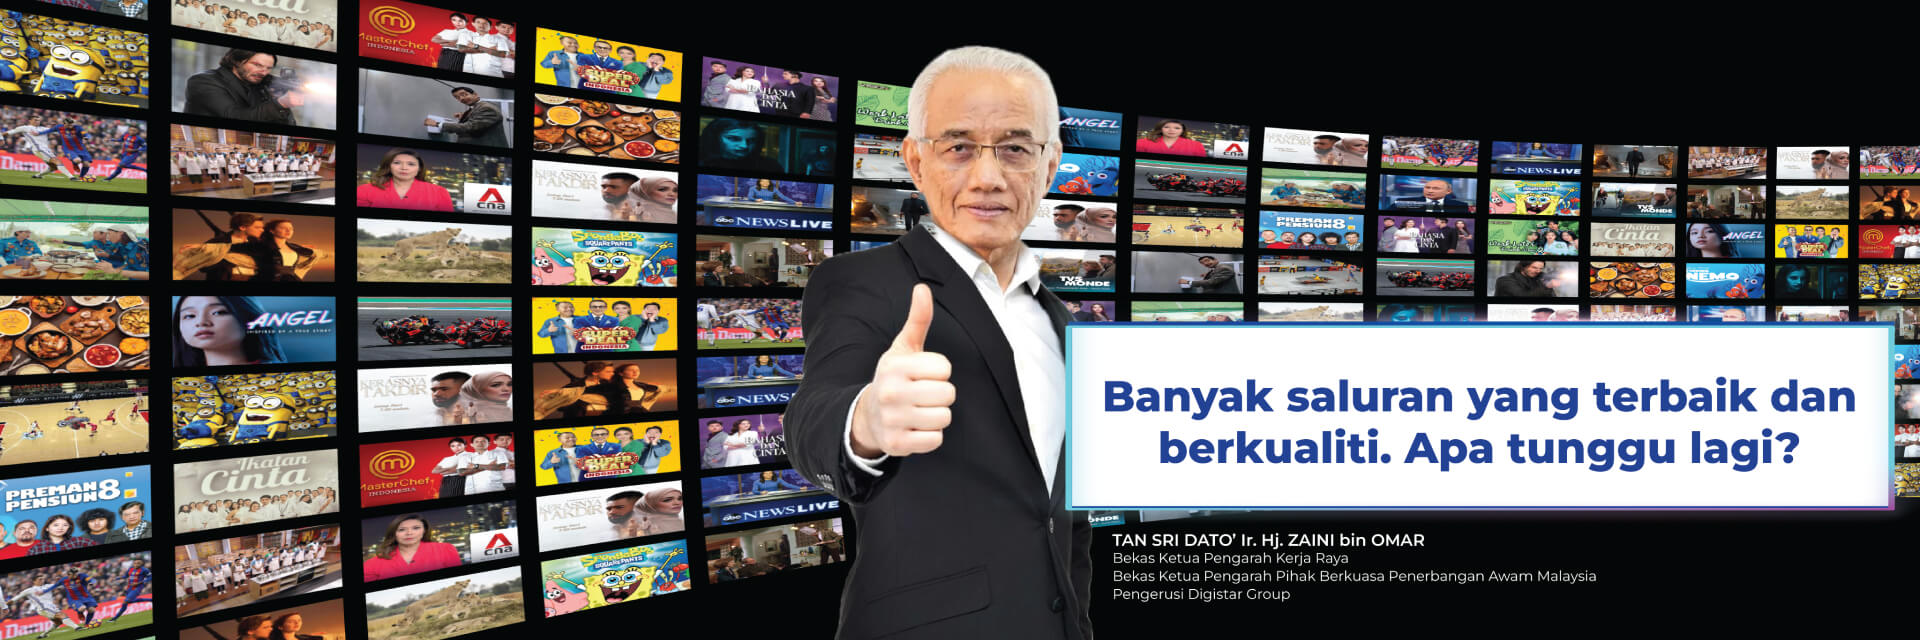 An old man wearing glasses, in a black suit and giving a thumbs up, stands in front of a collage of various TV screens